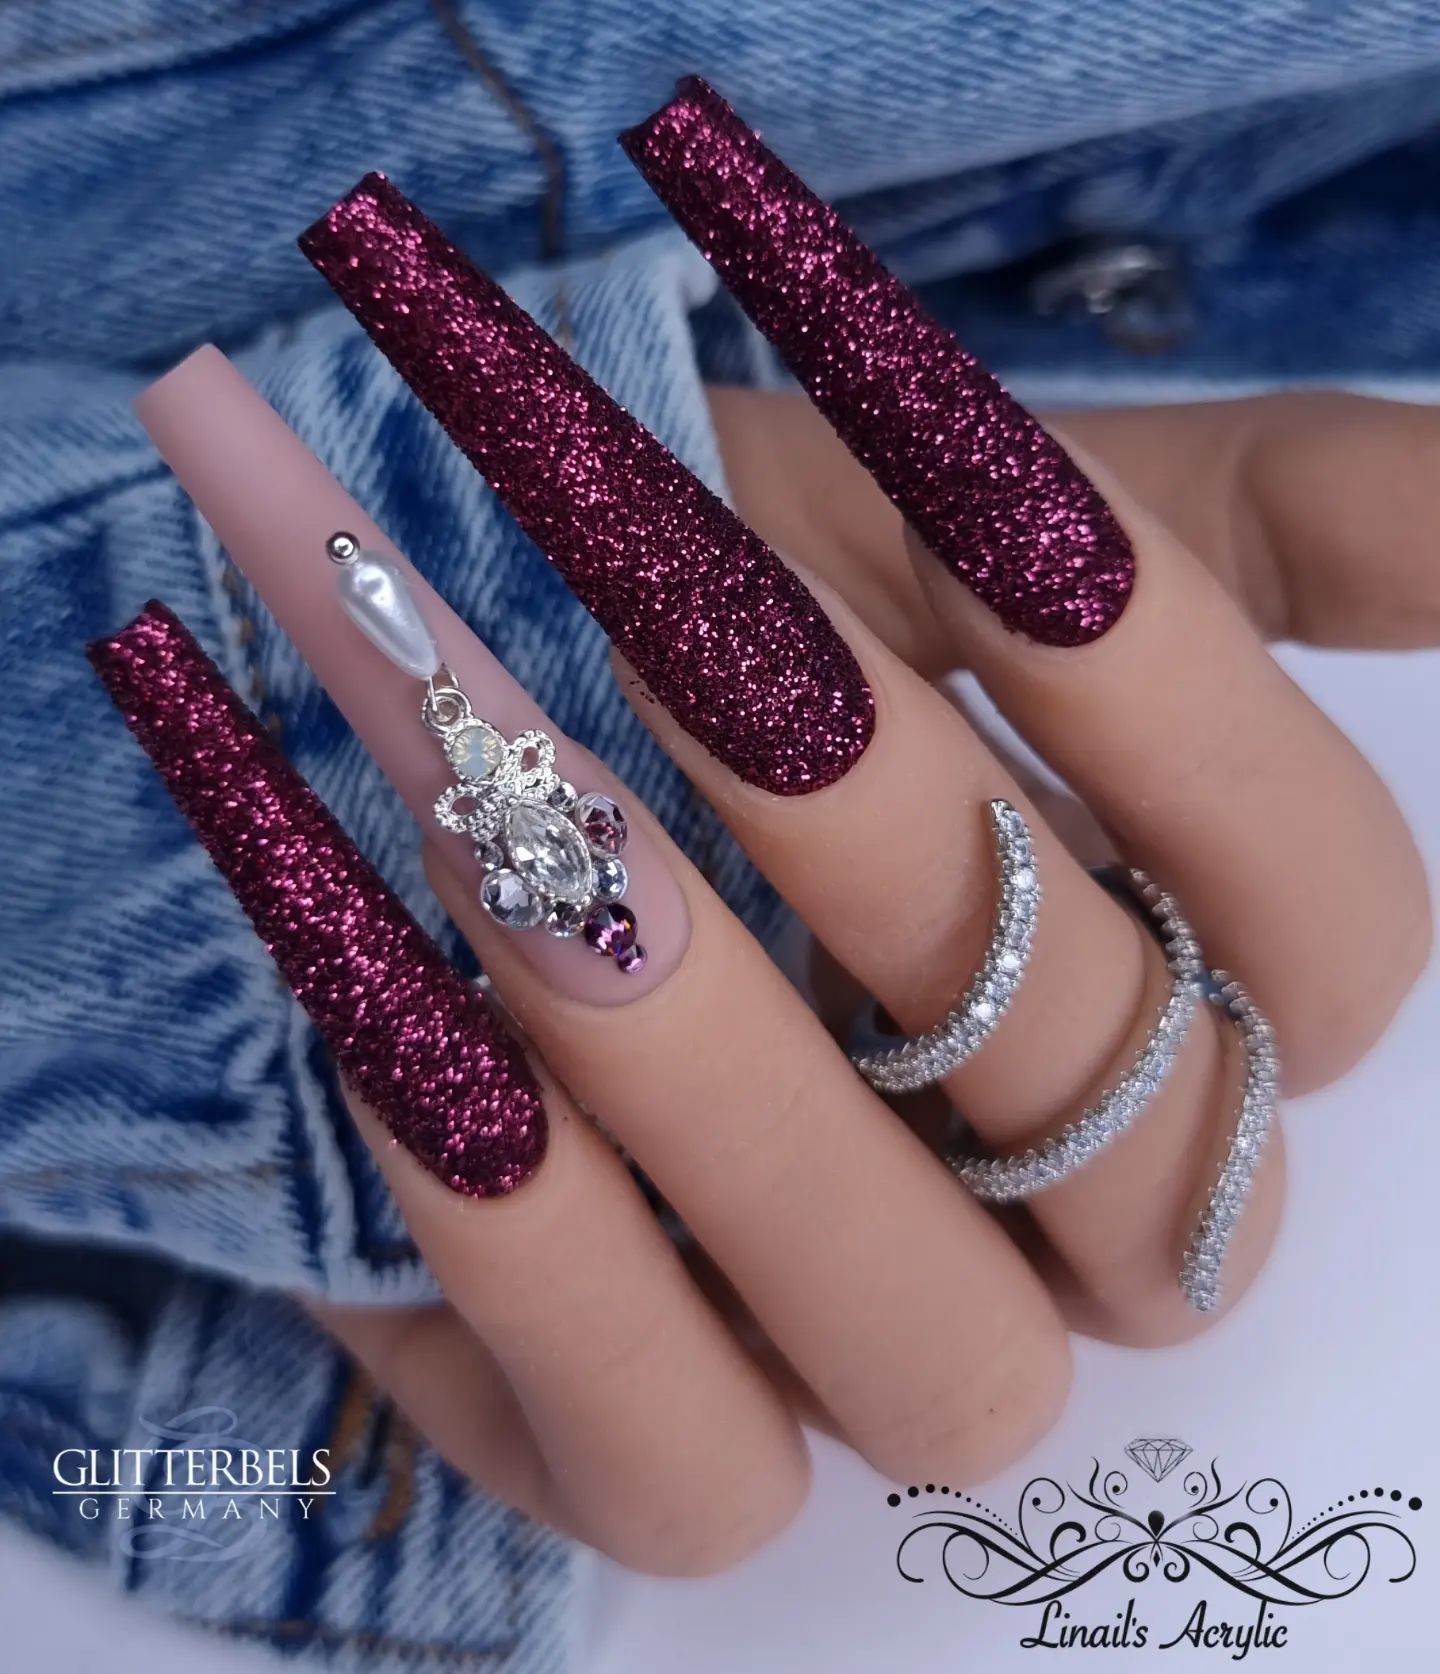 Long Coffin Nails with Burgundy Glitter and Rhinestones